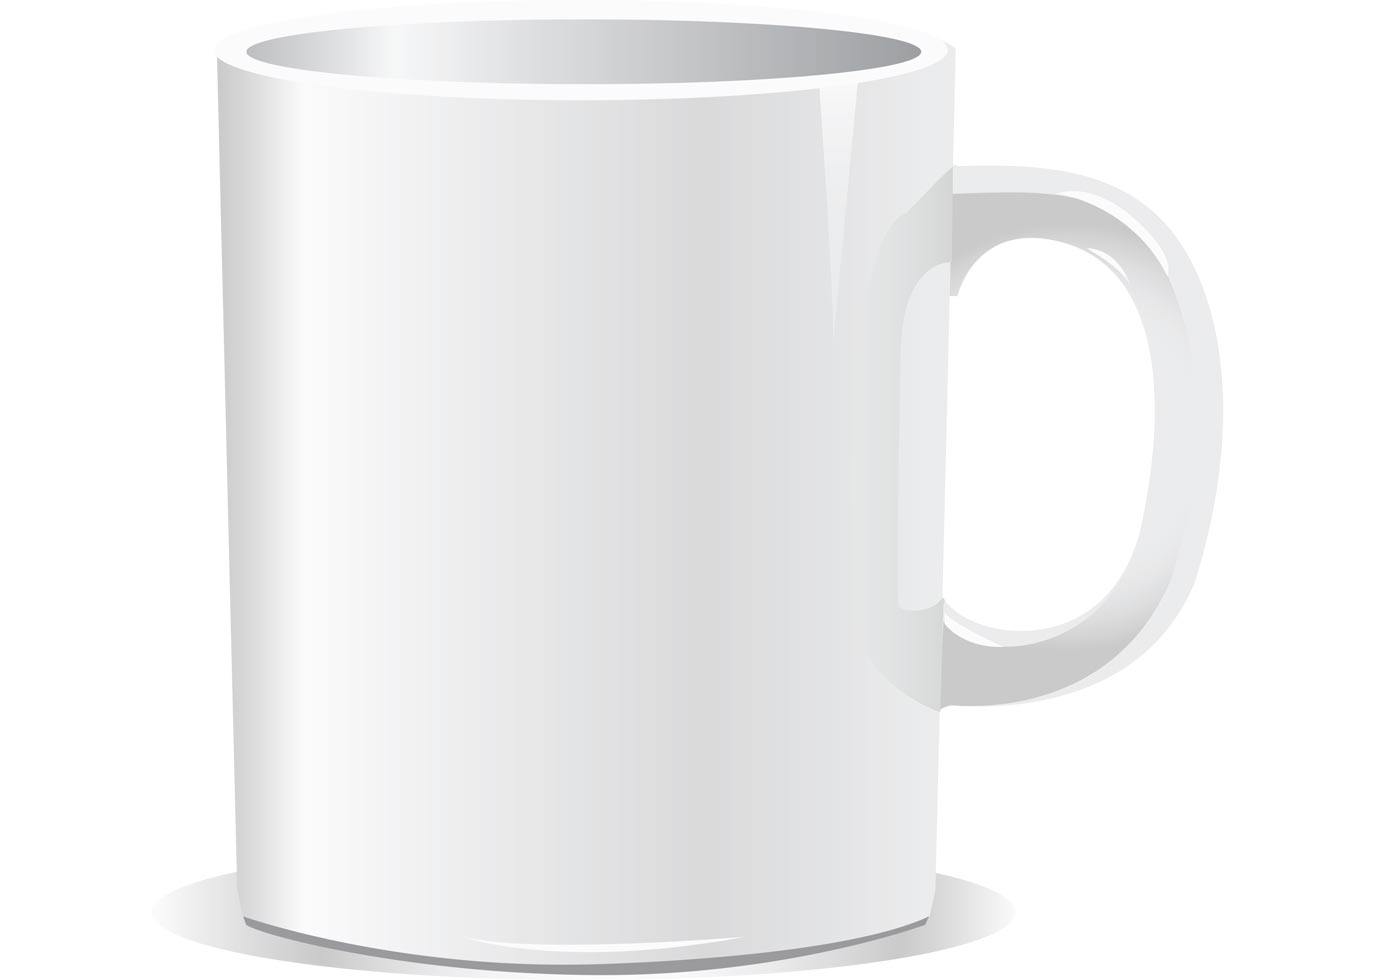 Coffee Cup Download Free Vector Art, Stock Graphics & Images